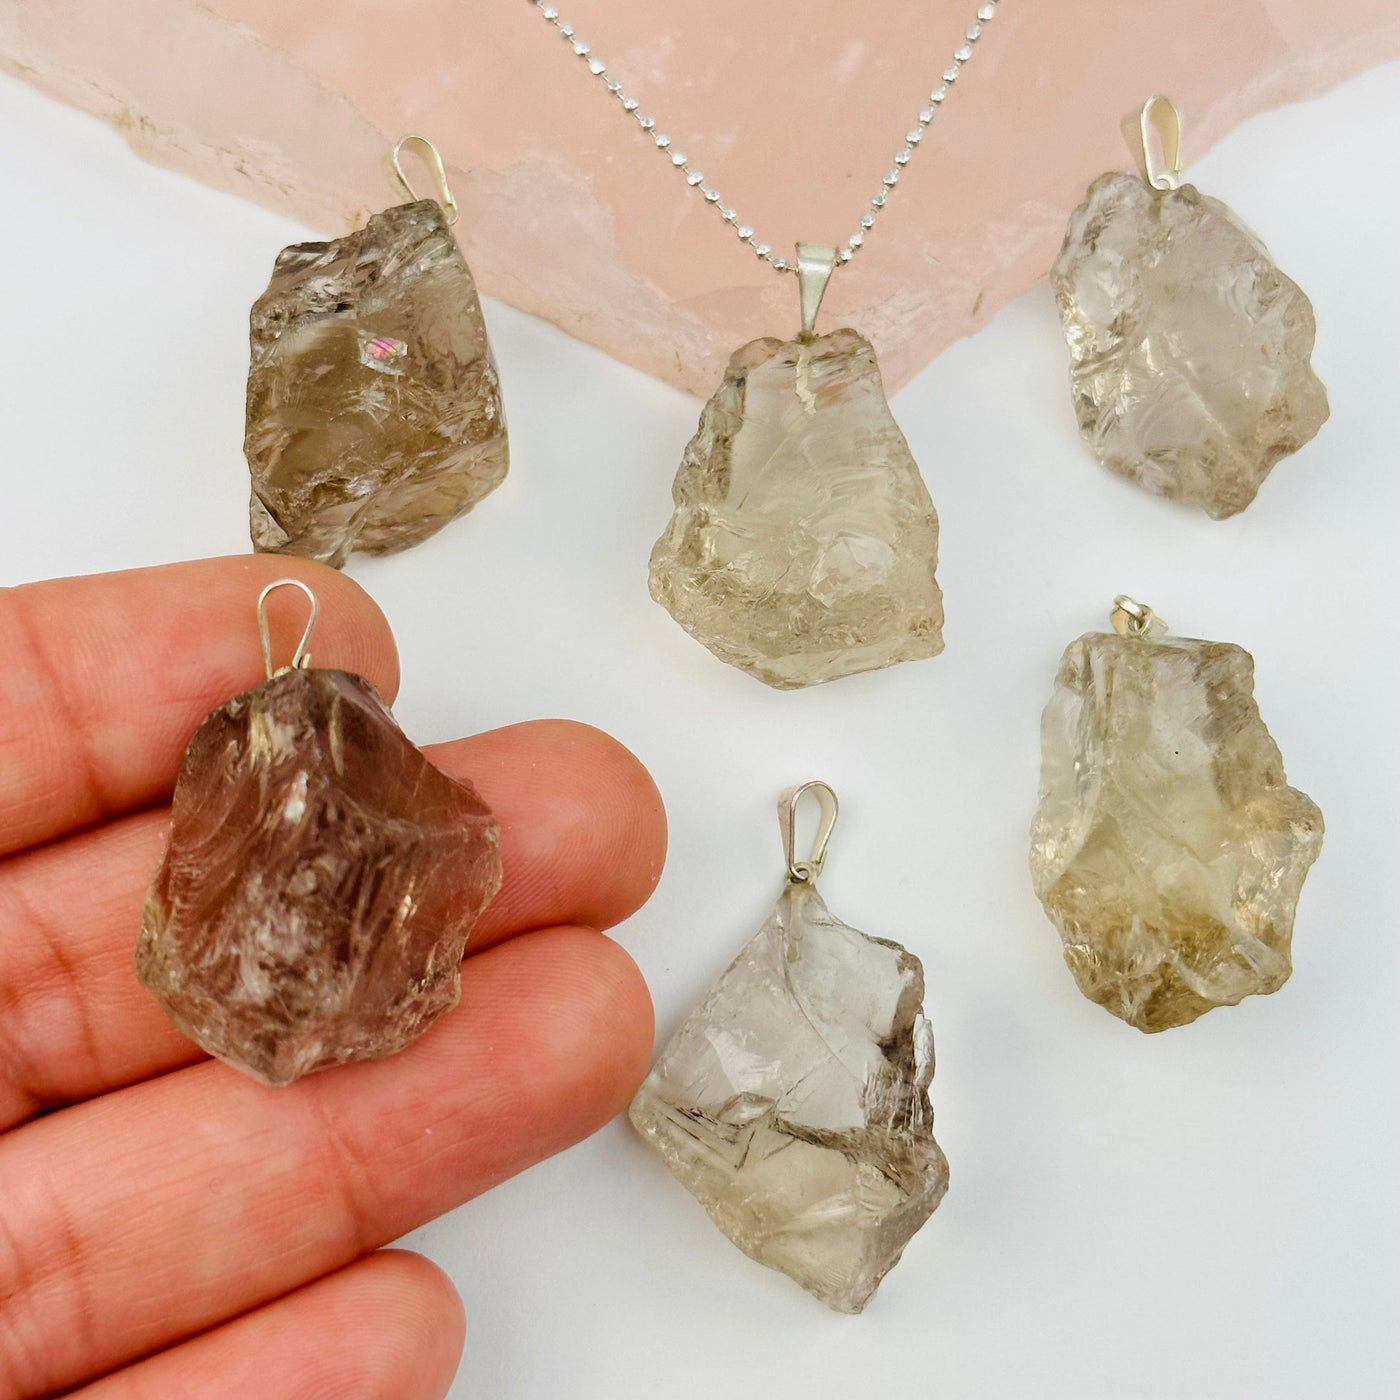 Rough Natural Crystal Stone Pendant - Smokey quartz - in hand for size reference